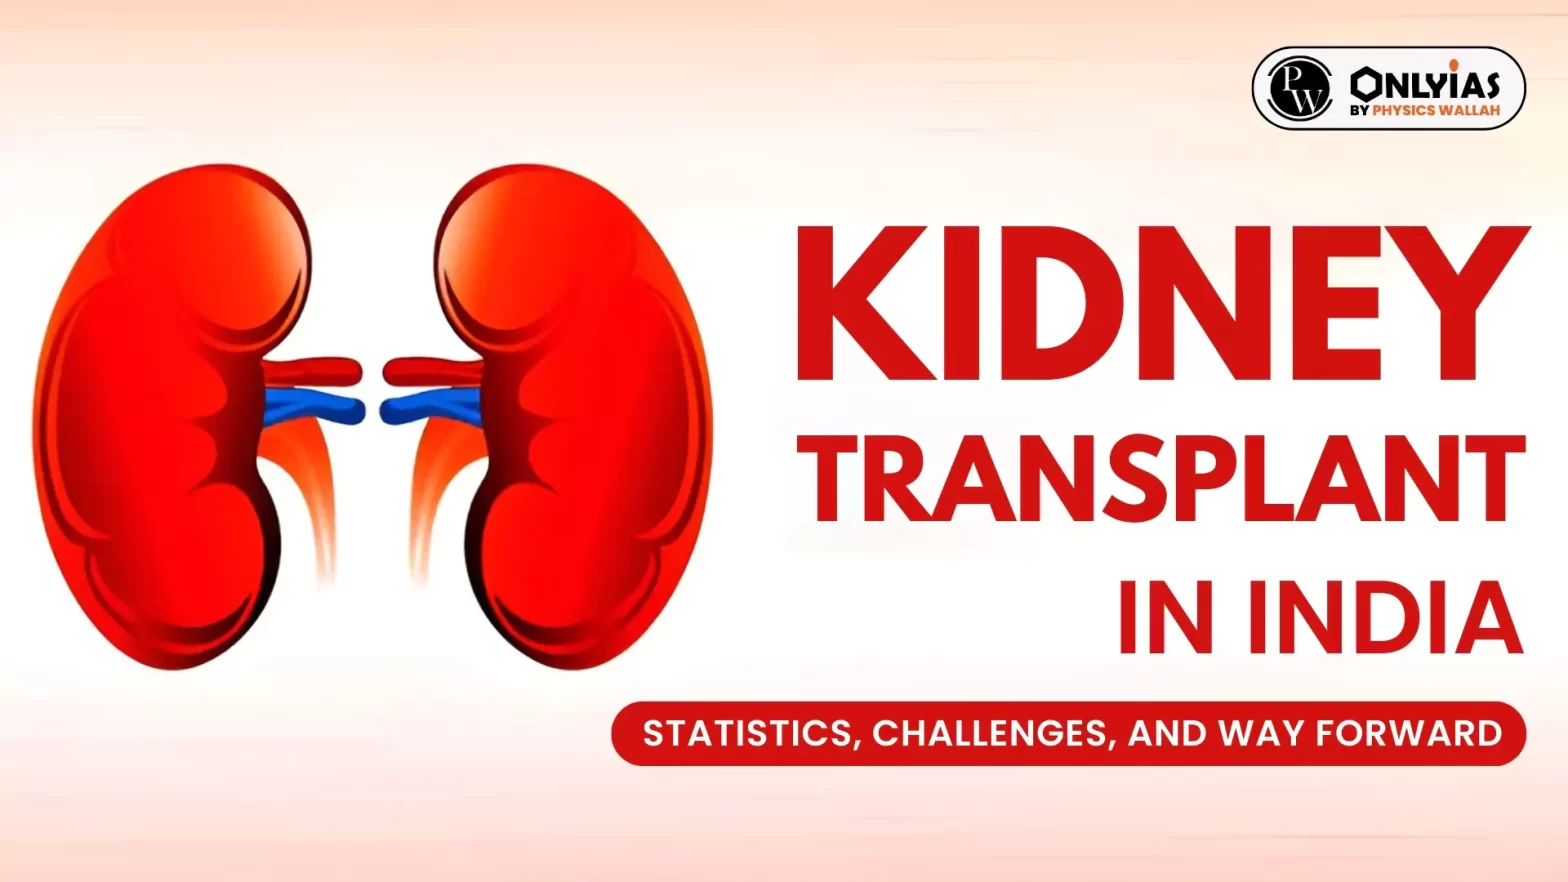 Kidney Transplant in India: Statistics, Challenges, and Way Forward